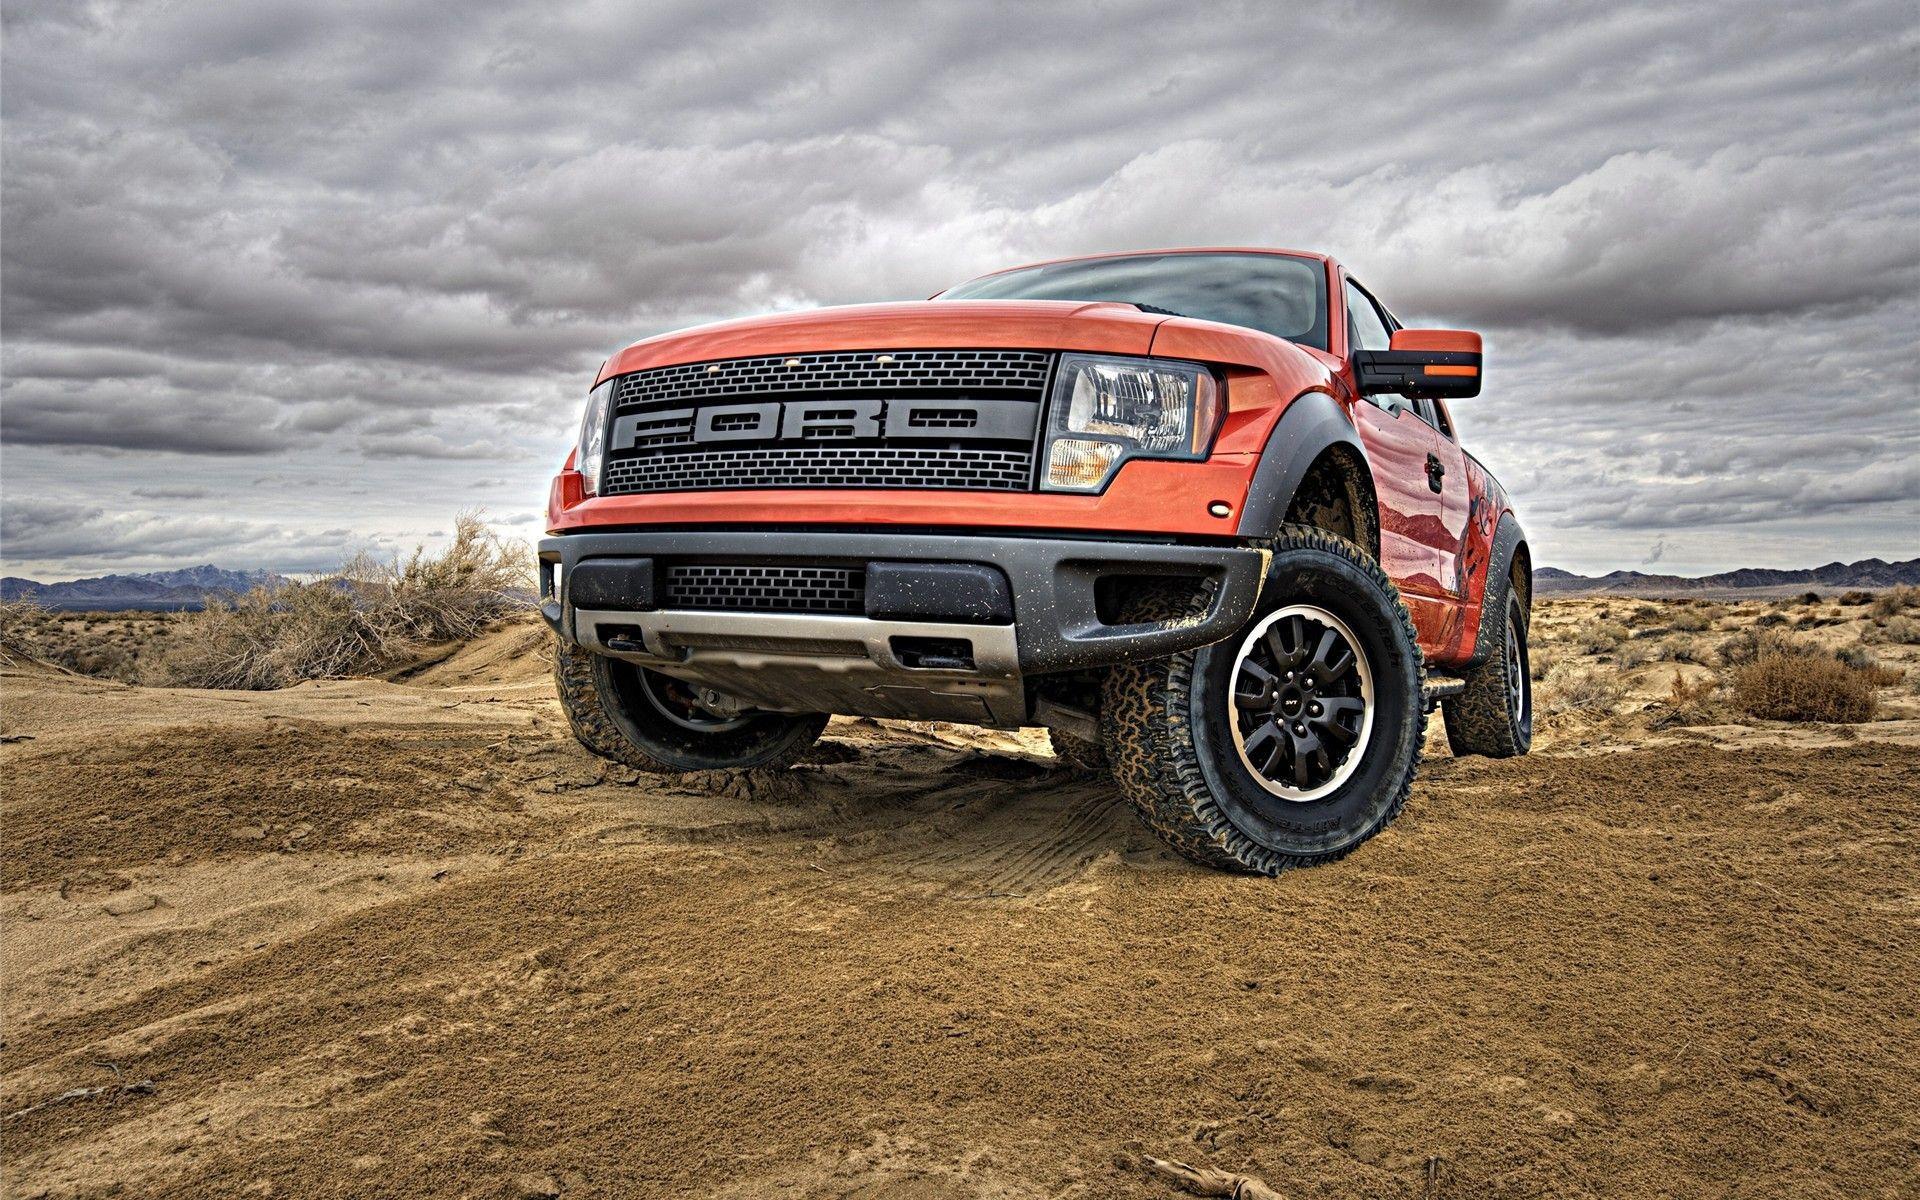 Ford F150 wallpapers – wallpapers free download